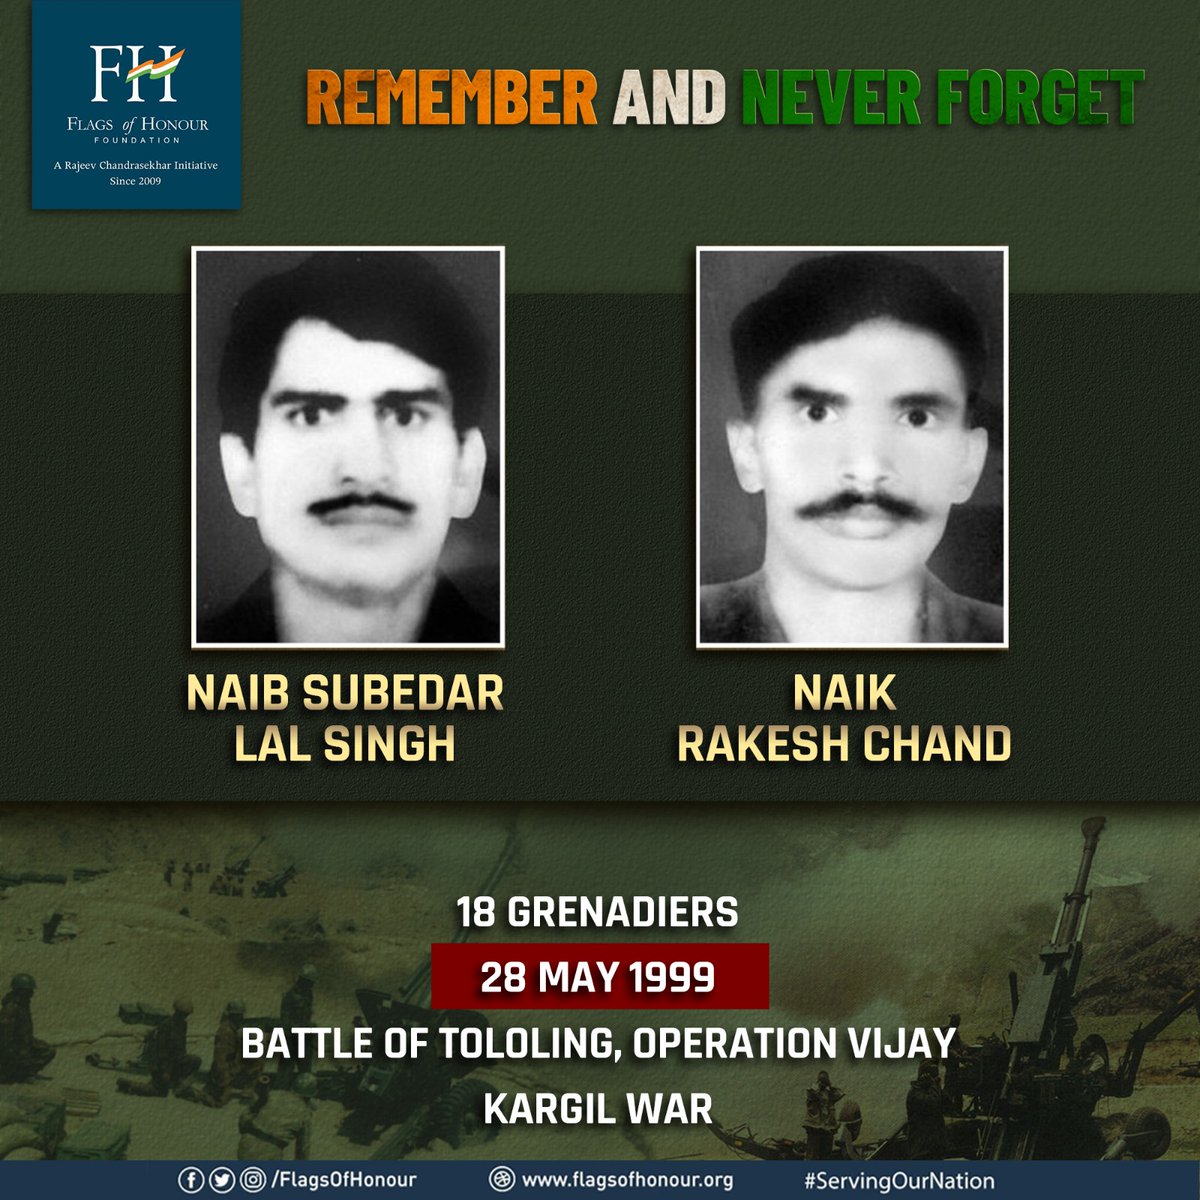 #OnThisDay Nb Sub Lal Singh and Nk Rakesh Chand made the supreme sacrifice in the Battle of Tololing, during Operation Vijay, #KargilWar 1999. 

#RememberAndNeverForget their supreme sacrifice #ServingOurNation